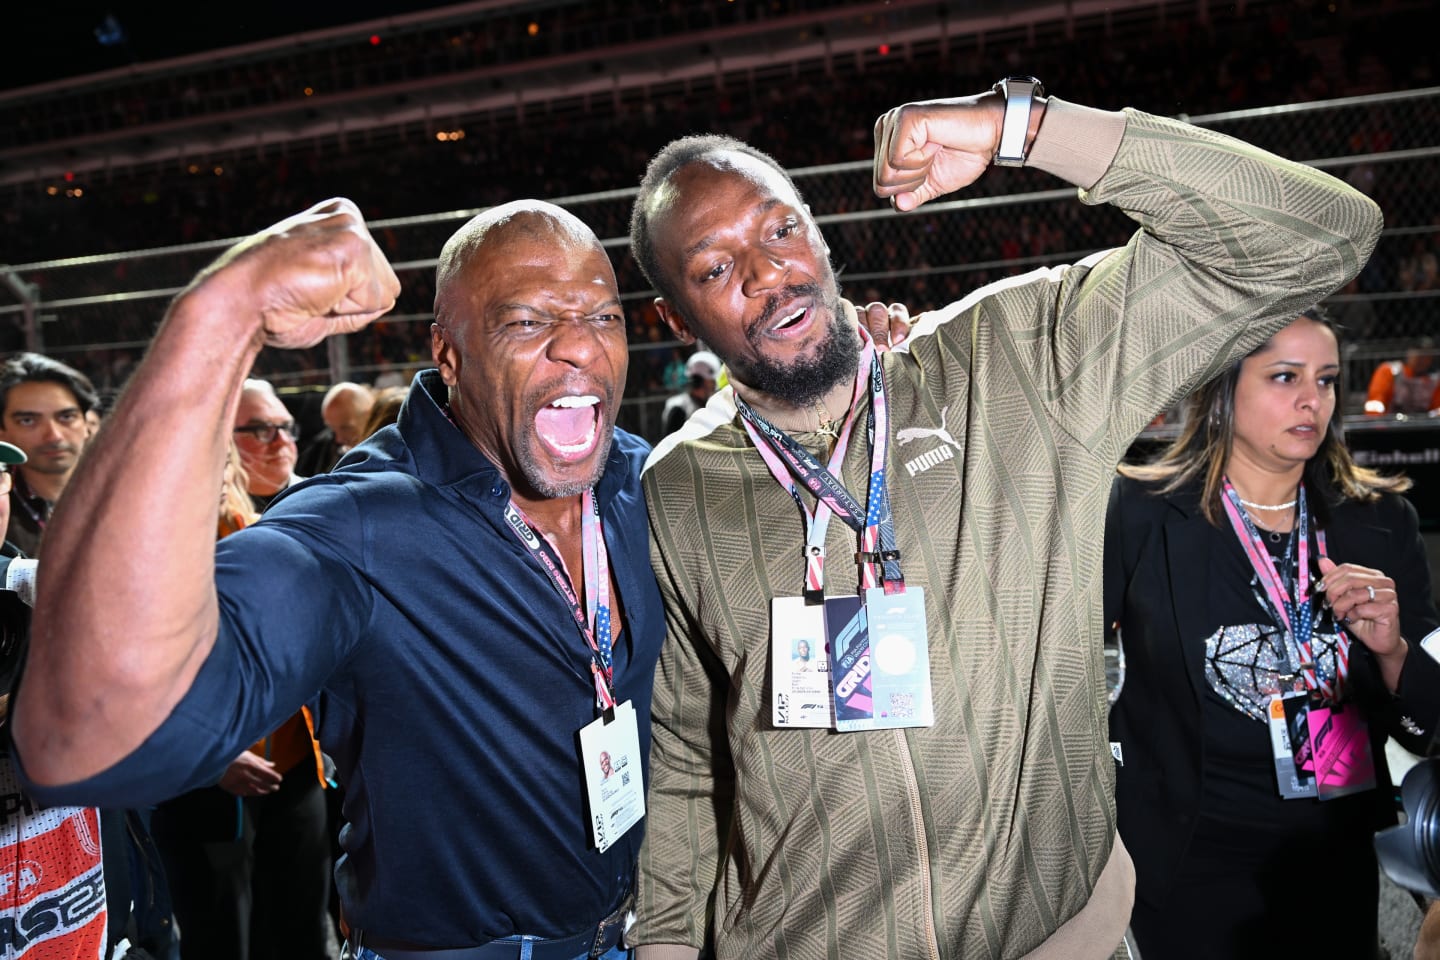 LAS VEGAS, NEVADA - NOVEMBER 18: Jamaican runner Usain Bolt (R) and actor Terry Crews (L) pose during the grid, prior to the F1 Grand Prix of Las Vegas at Las Vegas Strip Circuit on November 18, 2023 in Las Vegas, Nevada, United States. (Photo by Tayfun Cokun/Anadolu via Getty Images)